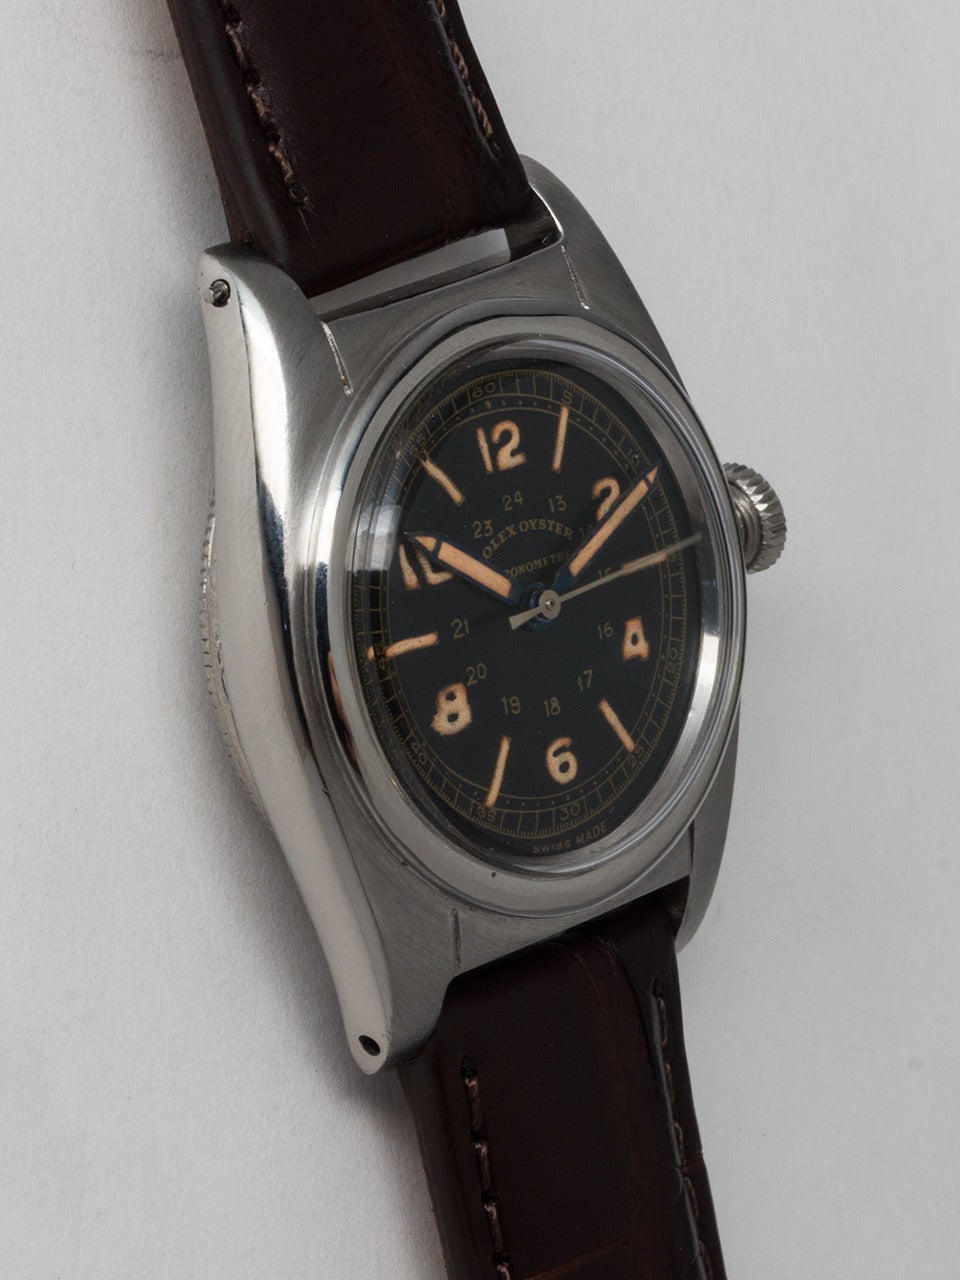 Rolex Stainless Steel Bubbleback Chronometer Wristwatch circa 1940s. 32mm diameter Oyster case with smooth bezel and acrylic crystal. Very pleasing restored matte black dial with patina'd luminous indexes and pencil hands. Powered by self winding